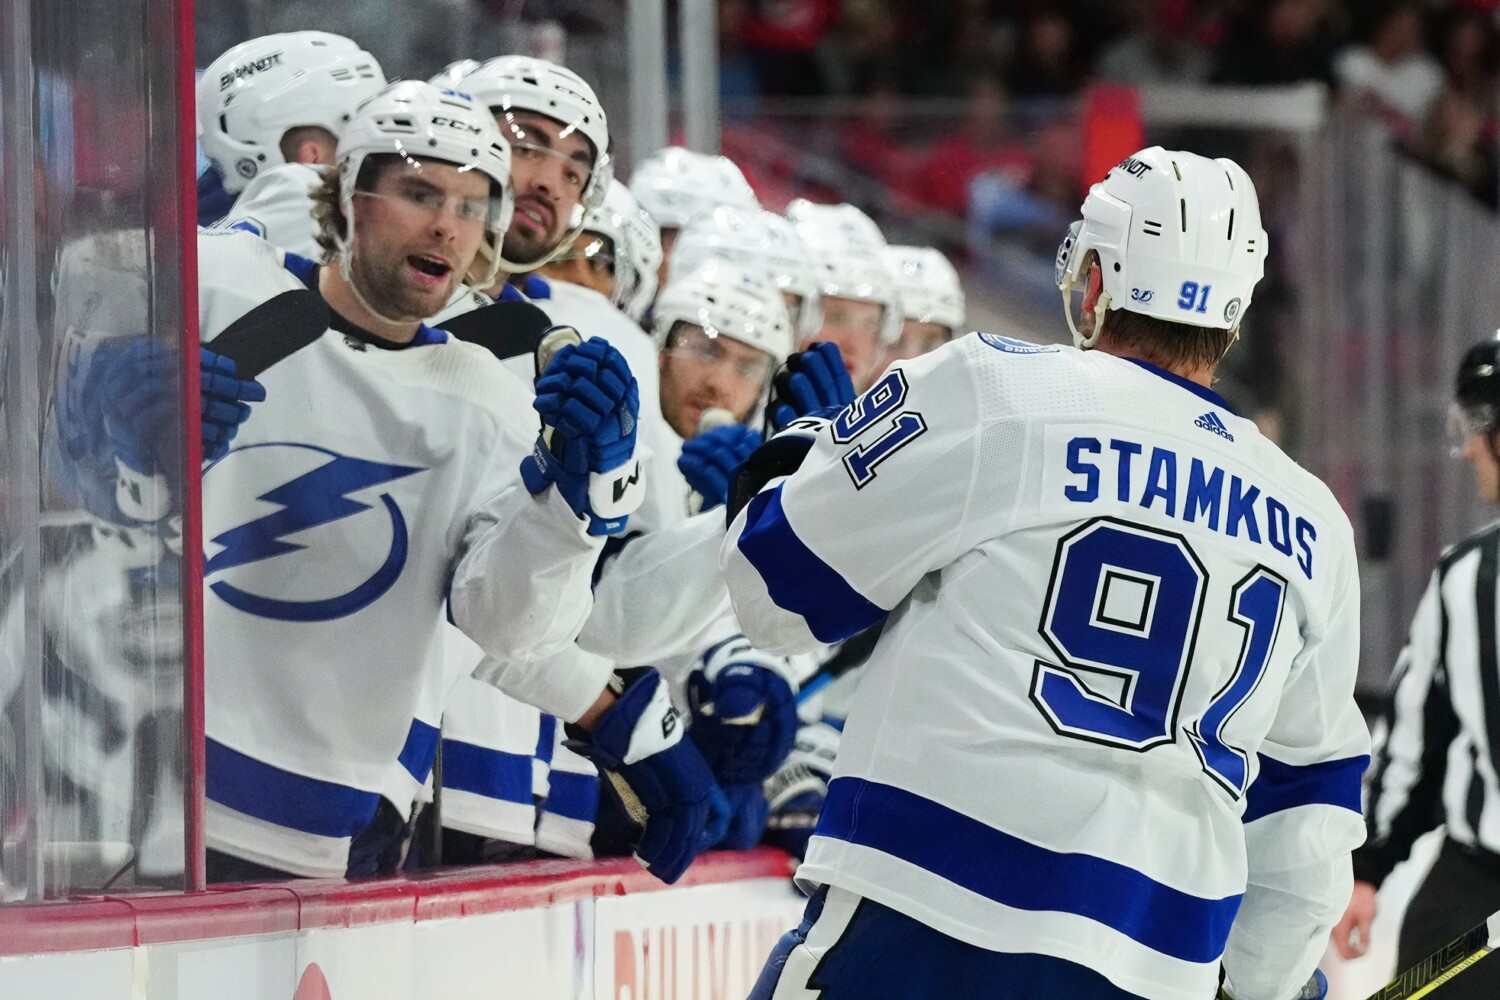 Lightning captain Steven Stamkos is disappointed about the lack of